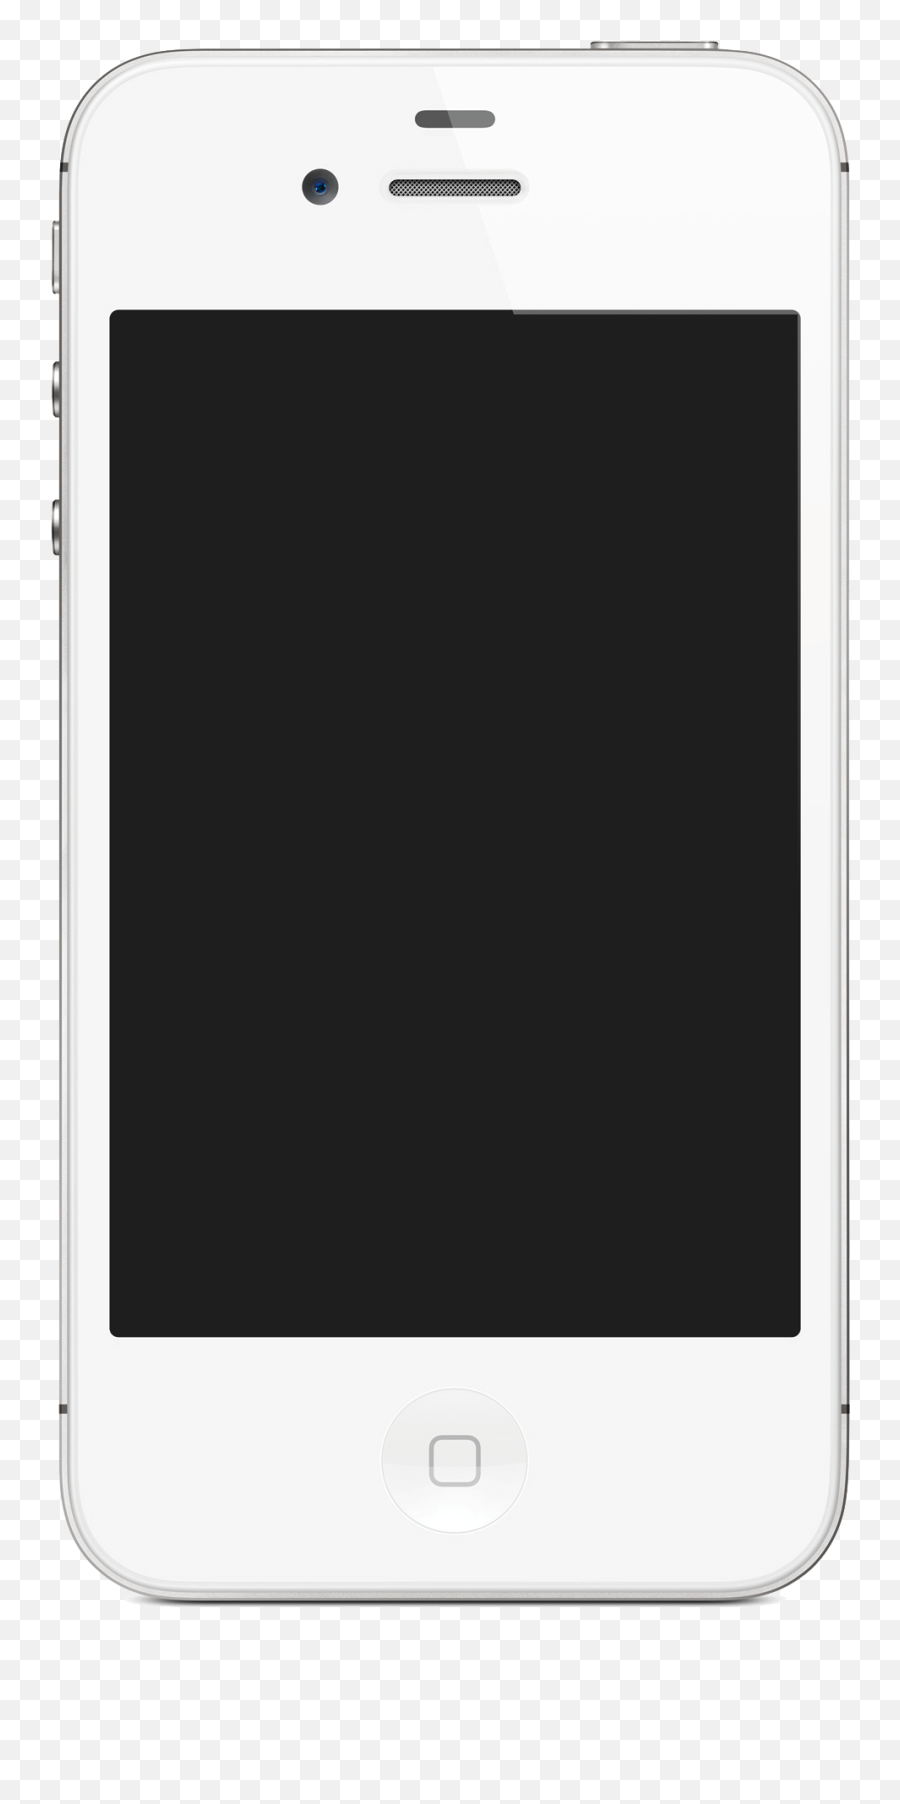 Vector Iphone Free Download Png Transparent Background - Iphone,Iphone.png Images